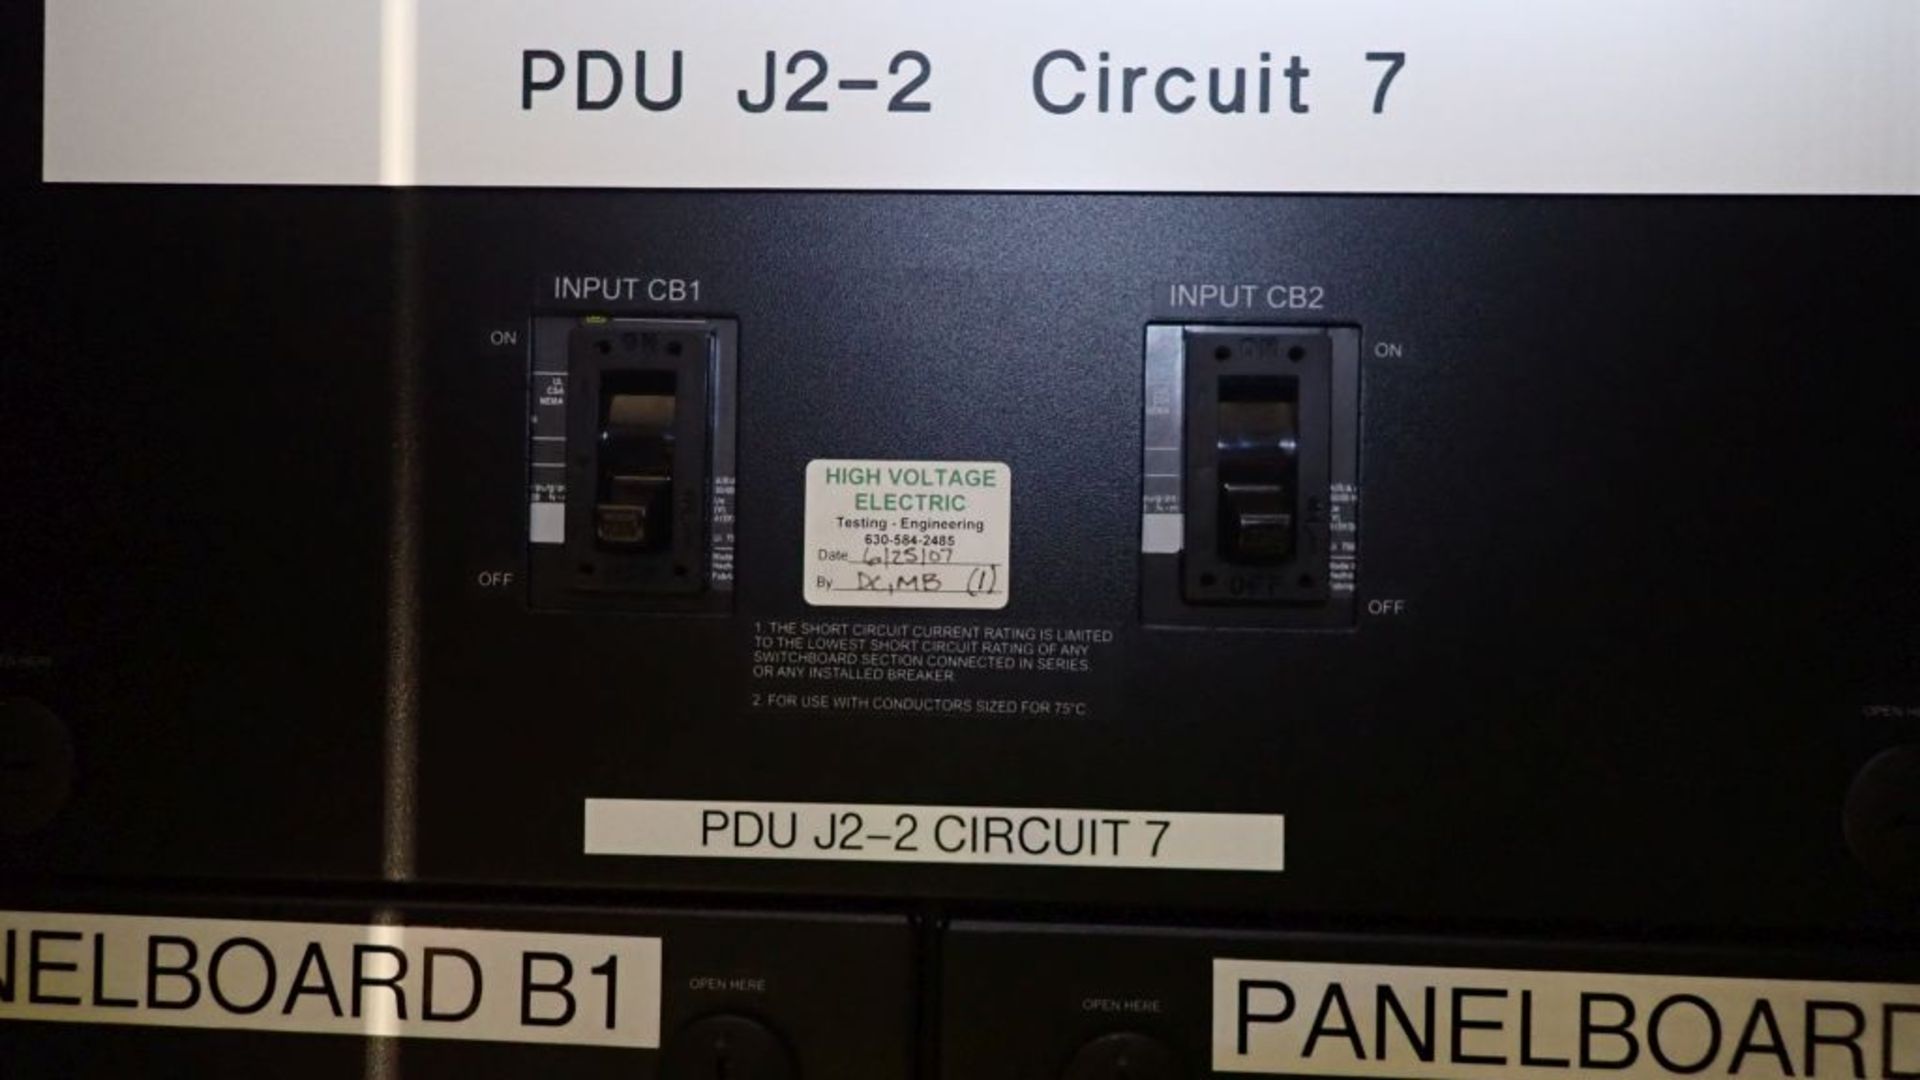 Onyx Power Rack Panelboard | Part No. 98-112-00-00; System 2; Input: 208/120 VAC; 4-Wire Plus Ground - Image 5 of 18